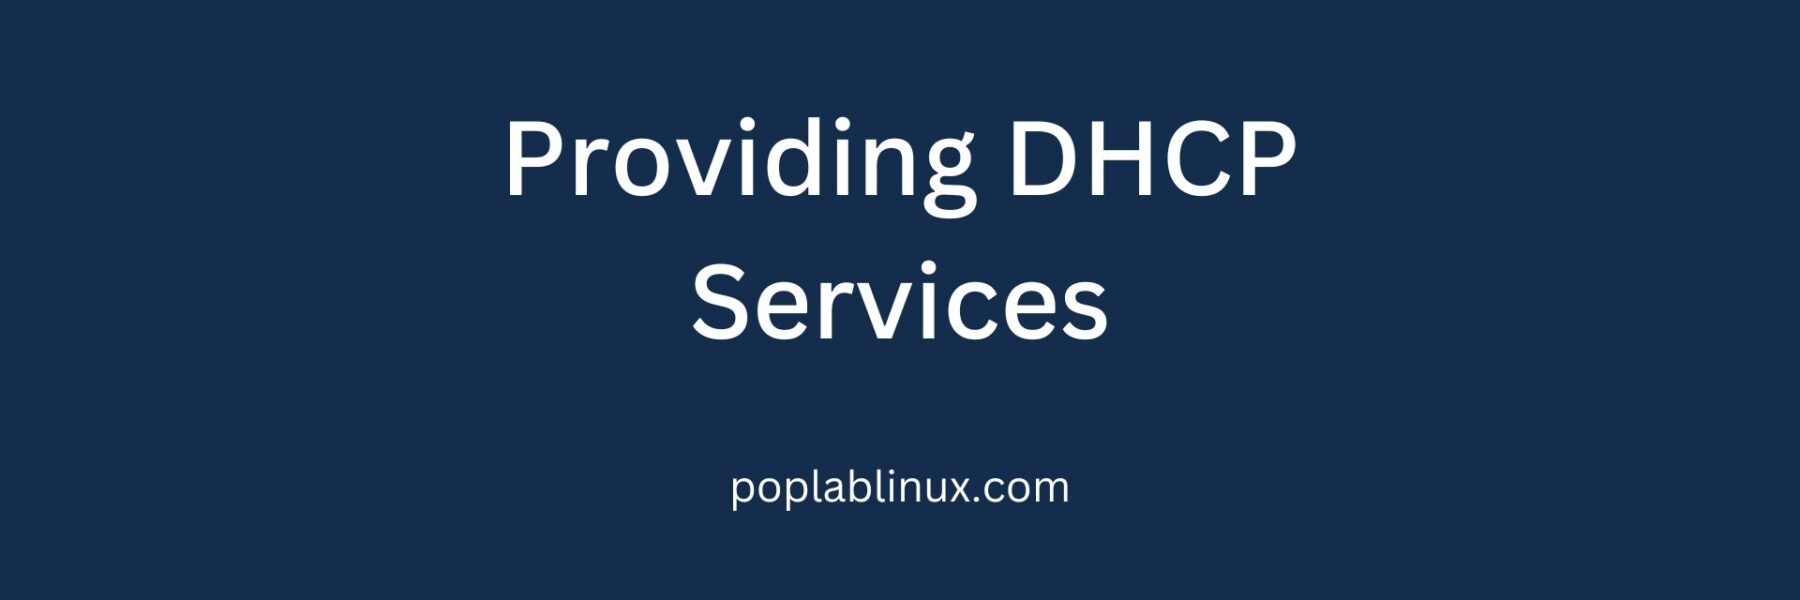 Providing DHCP Services